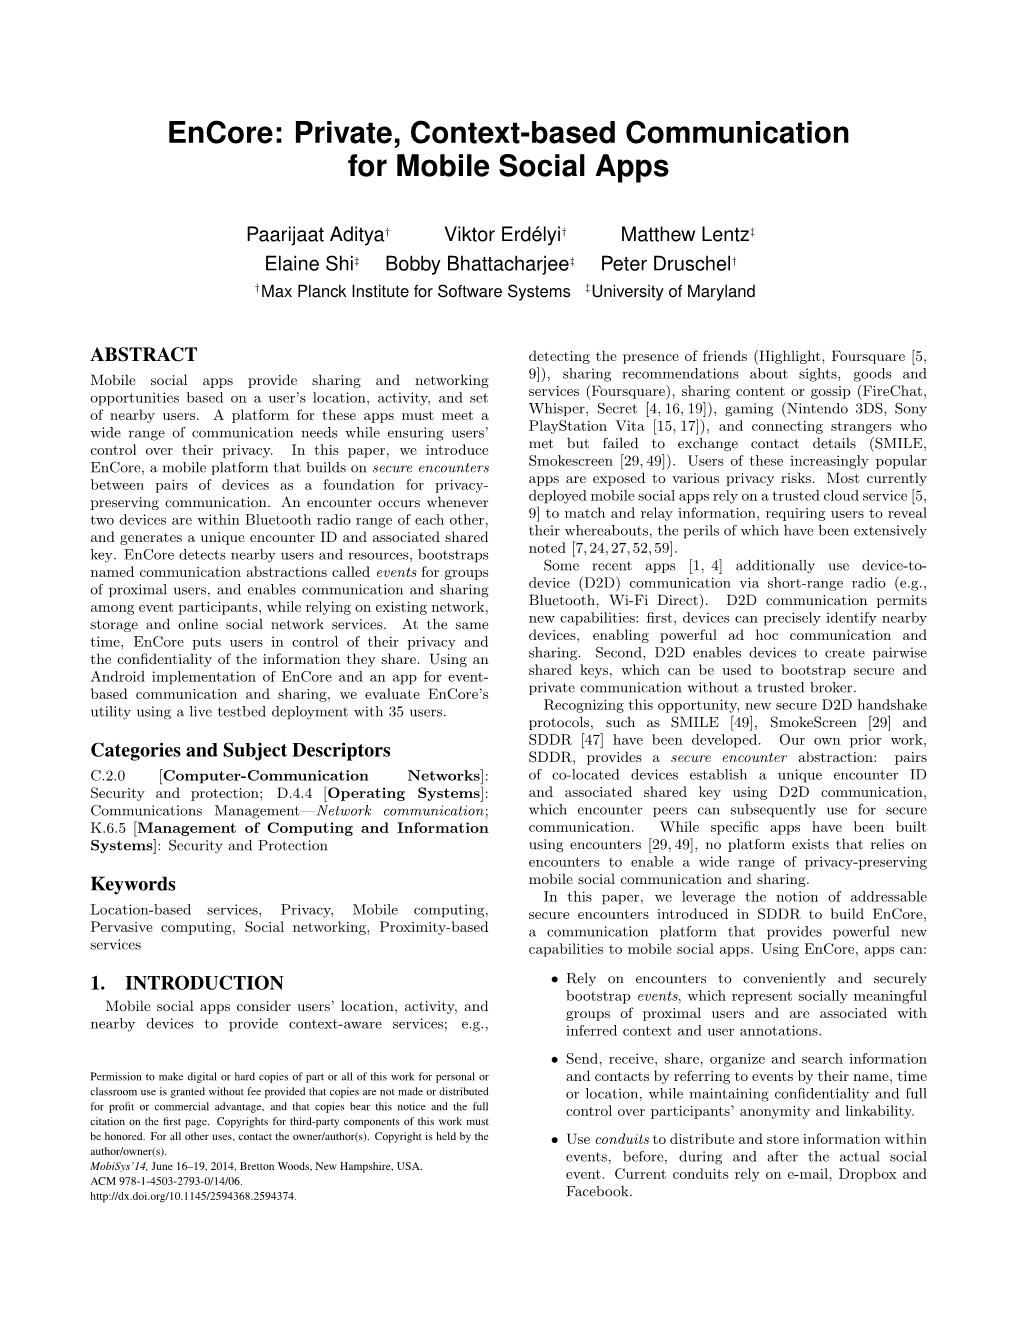 Encore: Private, Context-Based Communication for Mobile Social Apps